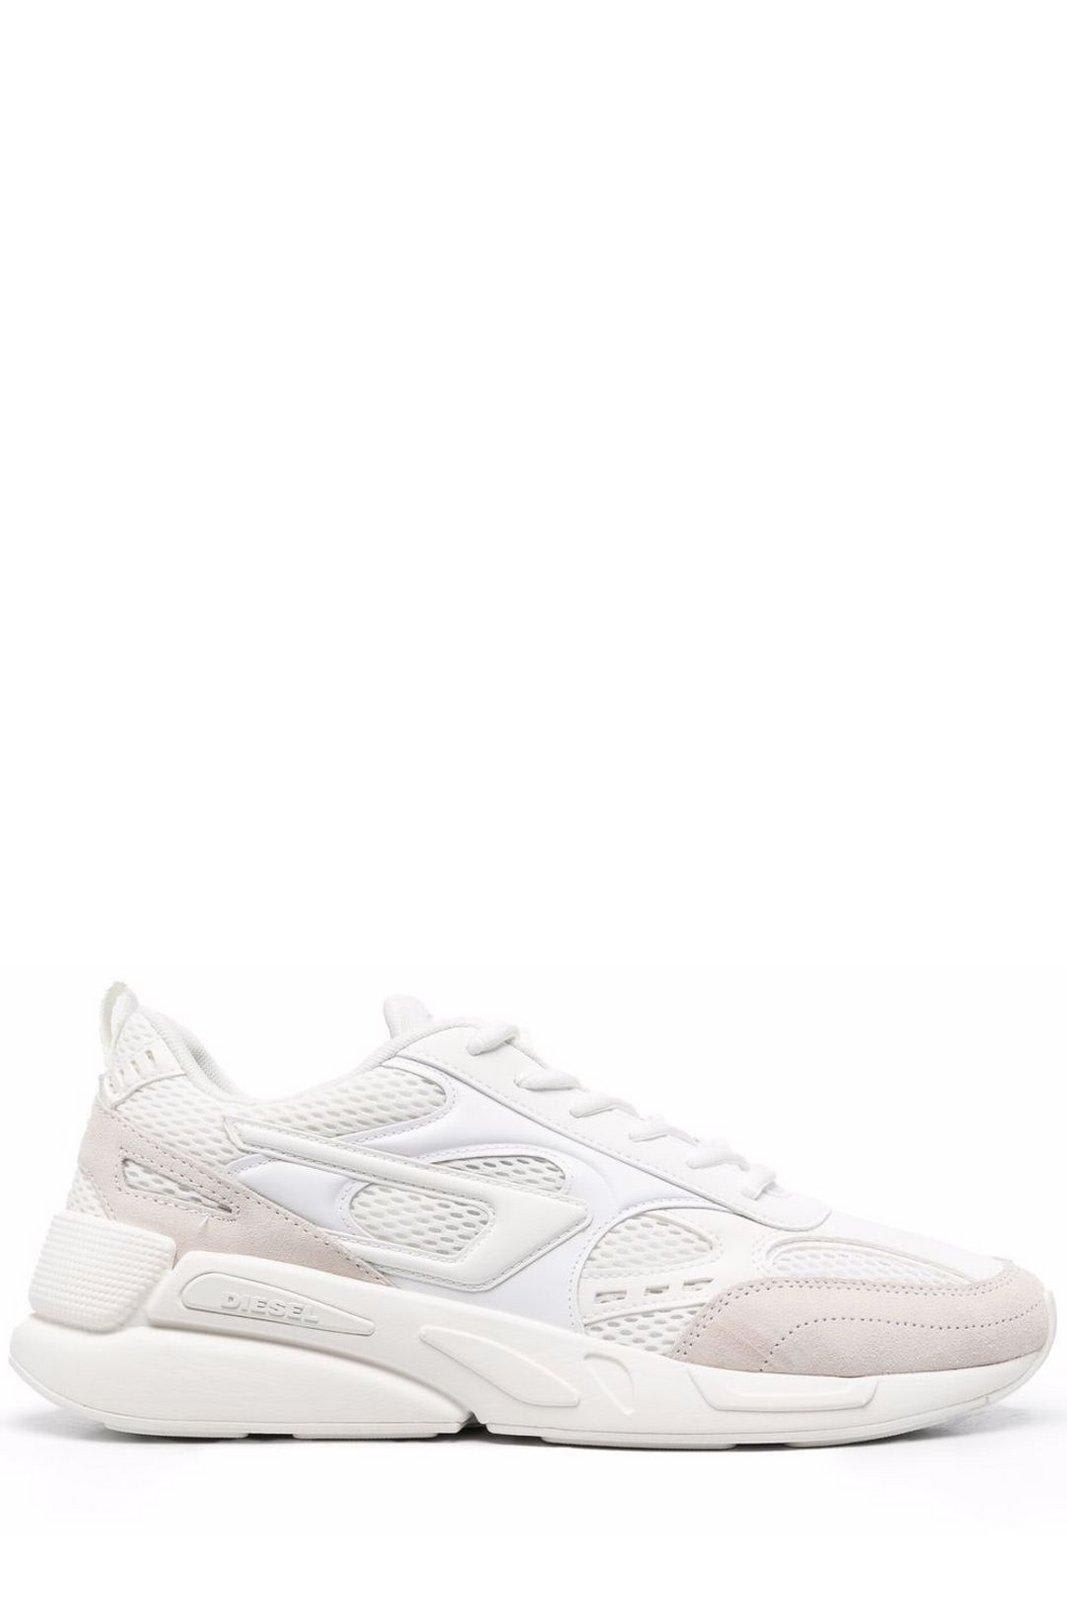 DIESEL S-SERENDIPITY PANELLED LACE-UP SNEAKERS